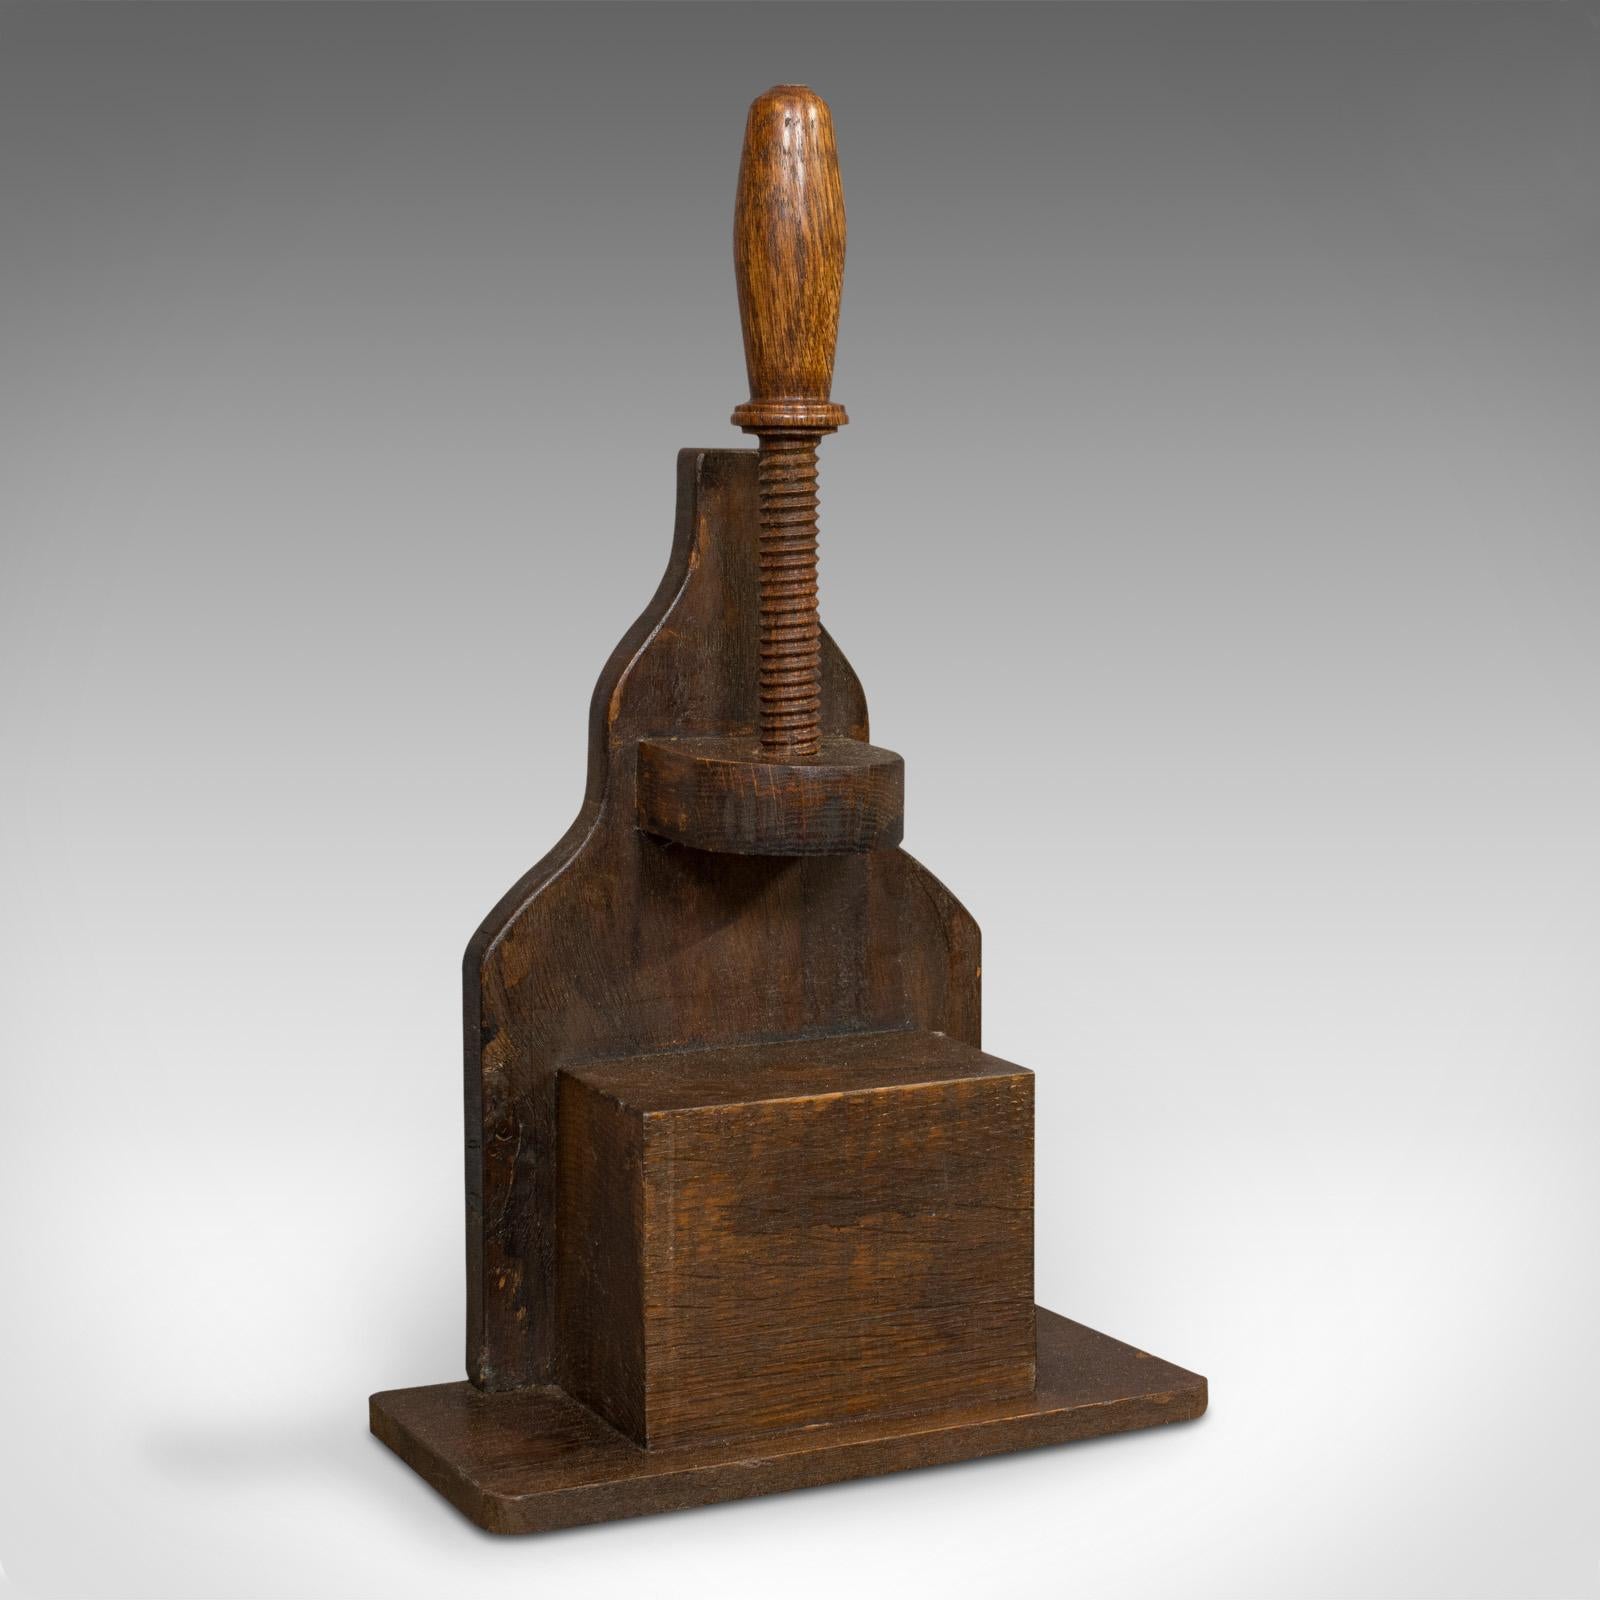 This is an antique screw press. An English, oak nutcracker, bookbinding or kitchen press, dating to the Victorian period, circa 1880.

Fine Victorian press
Displays a desirable aged patina
Oak shows fine grain interest
Turned oak screw offers